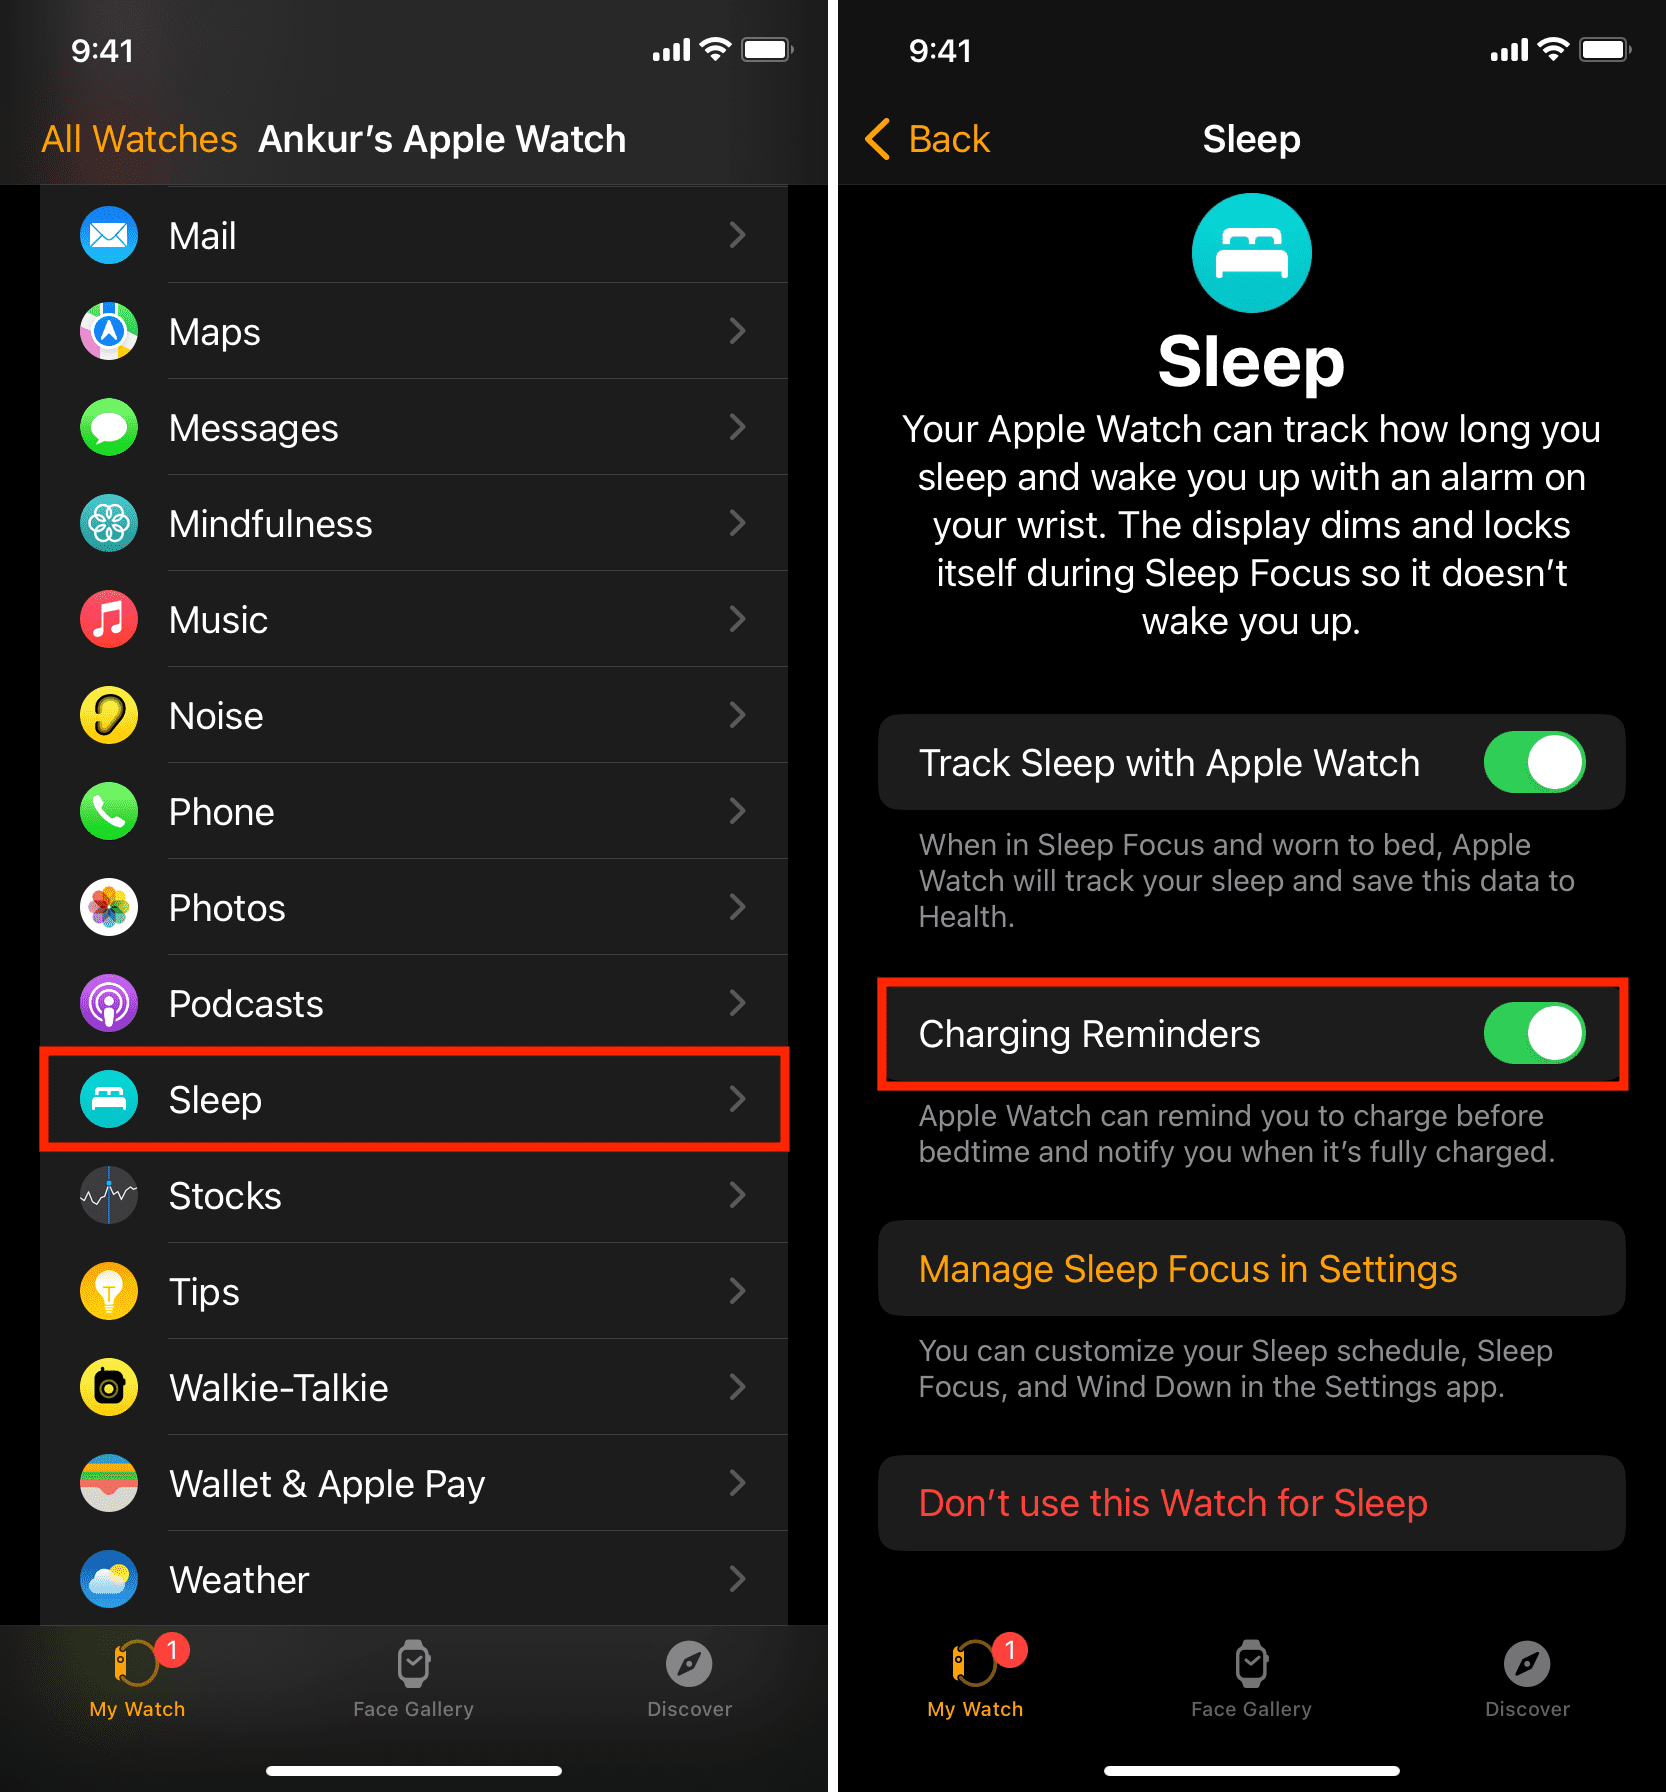 Awaken klinge ankomme How to get notified when your Apple Watch is fully charged